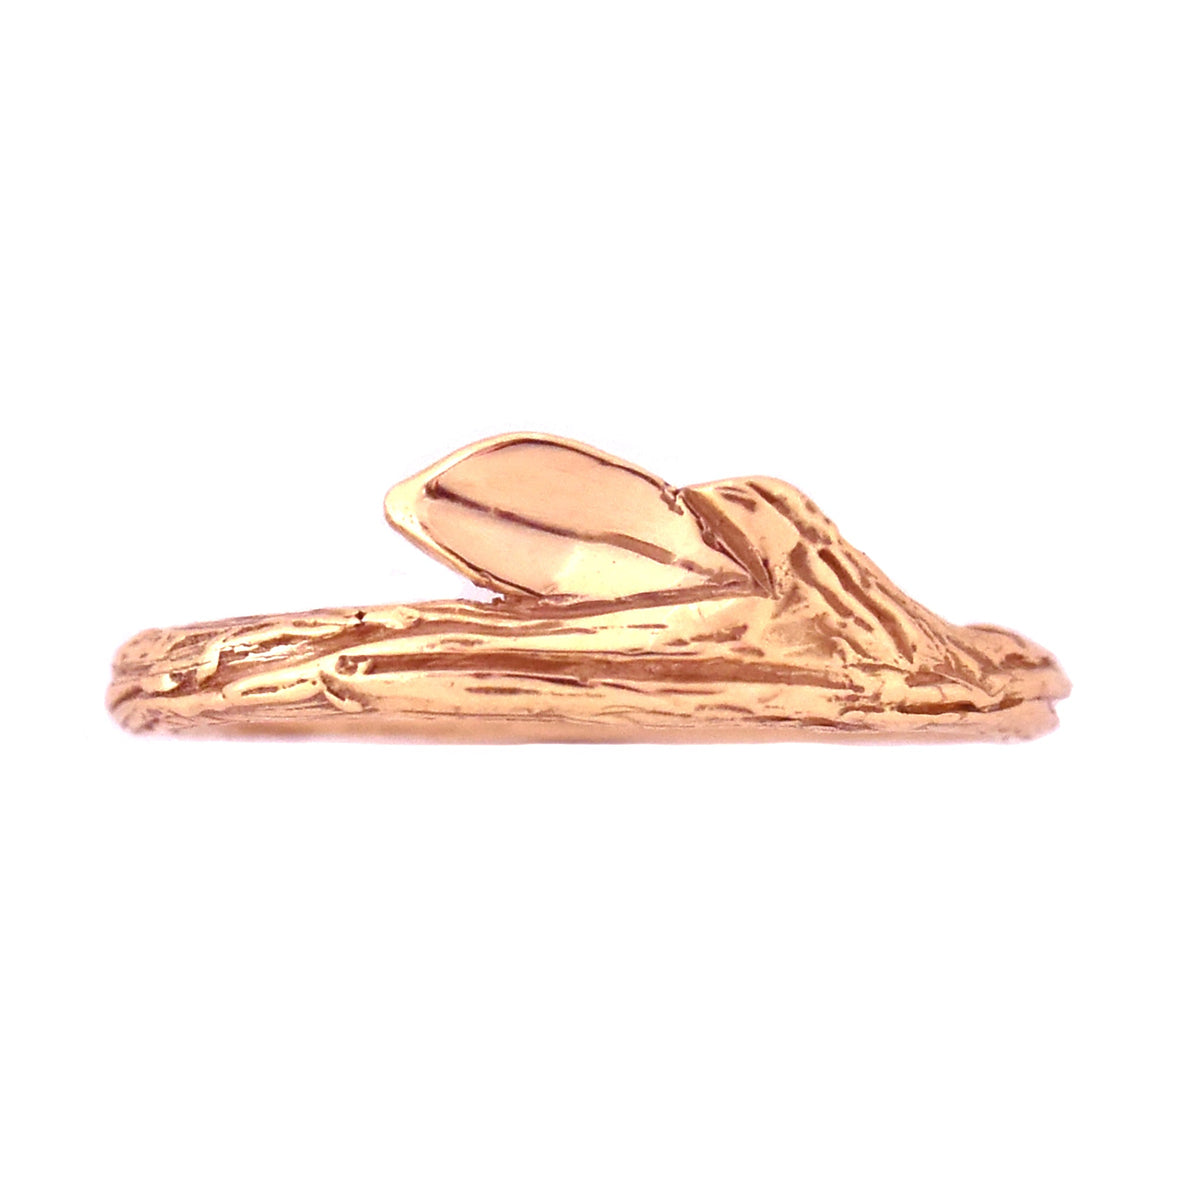 Gold Summer Twig Ring - your choice of gold - Wedding Ring 14K Rose Gold 14K Yellow Gold 3906 - handmade by Beth Millner Jewelry